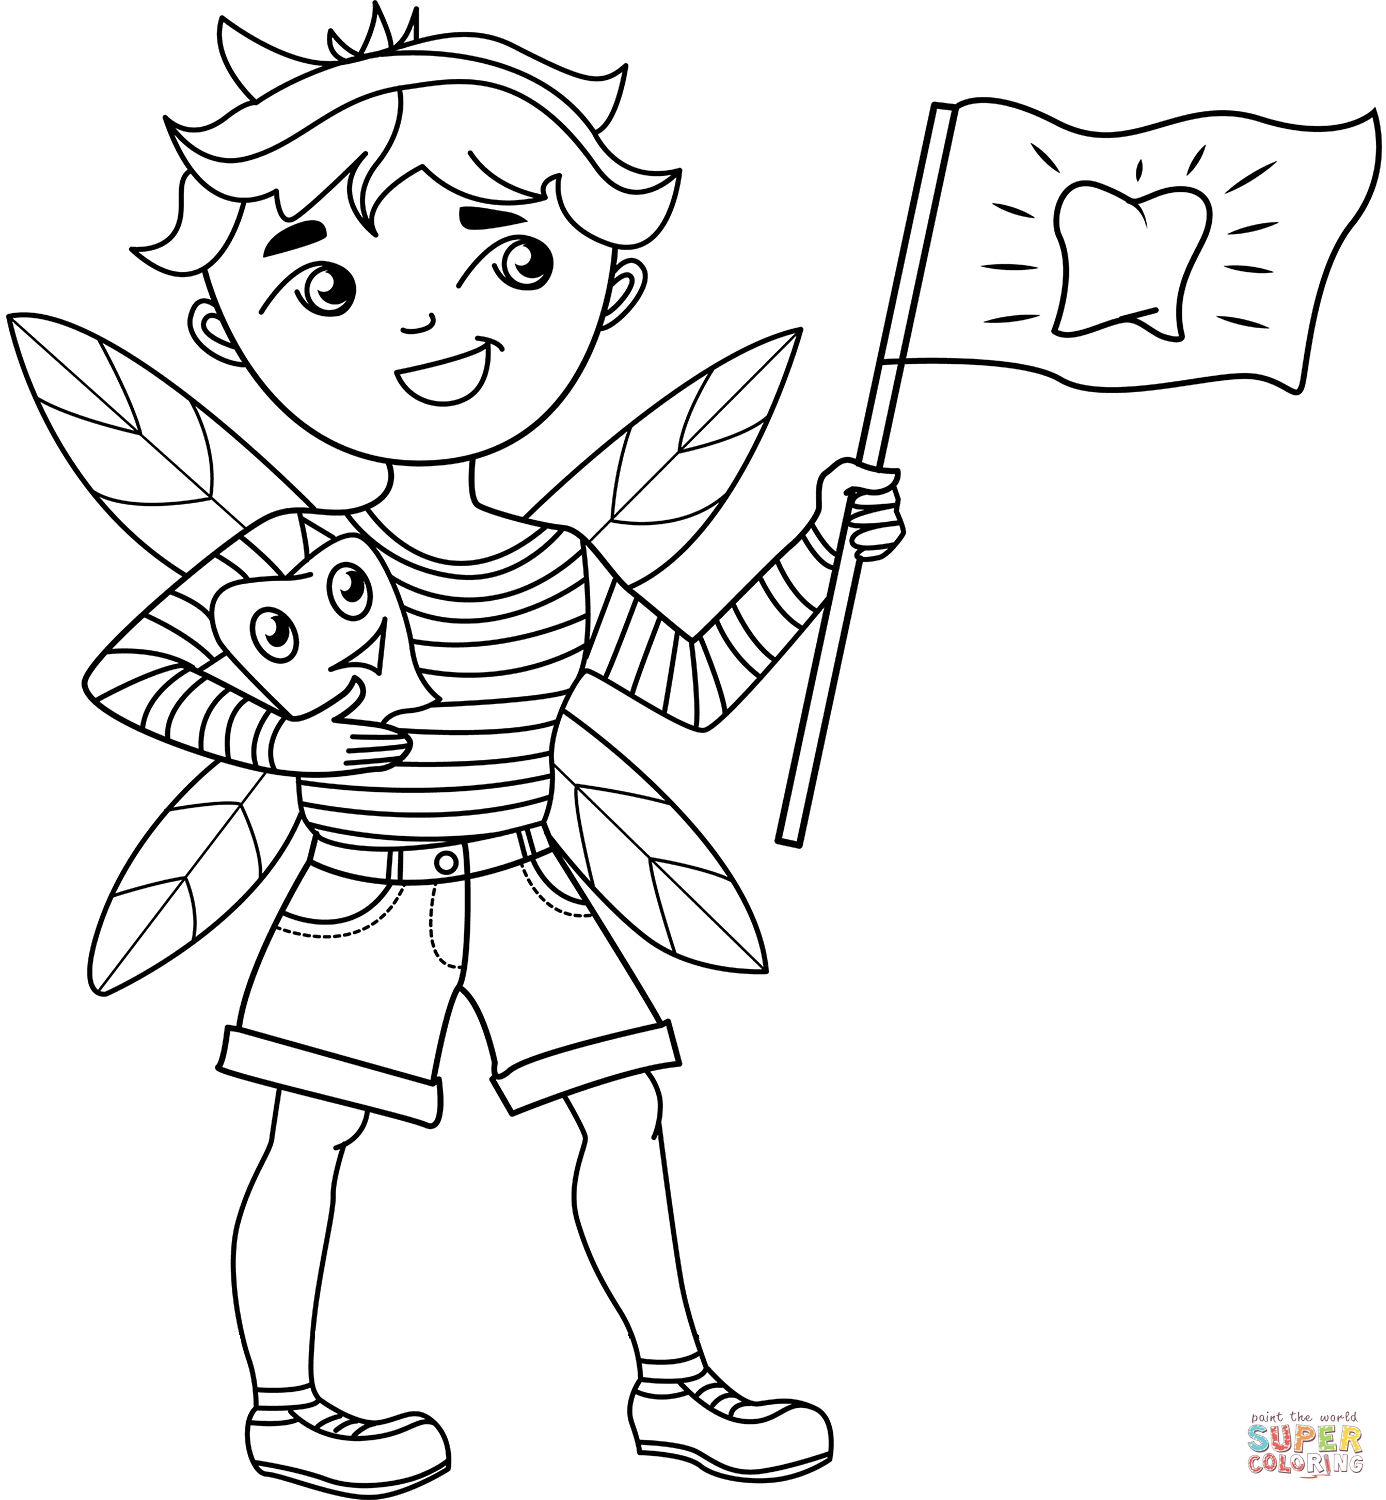 Boy tooth fairy coloring page free printable coloring pages